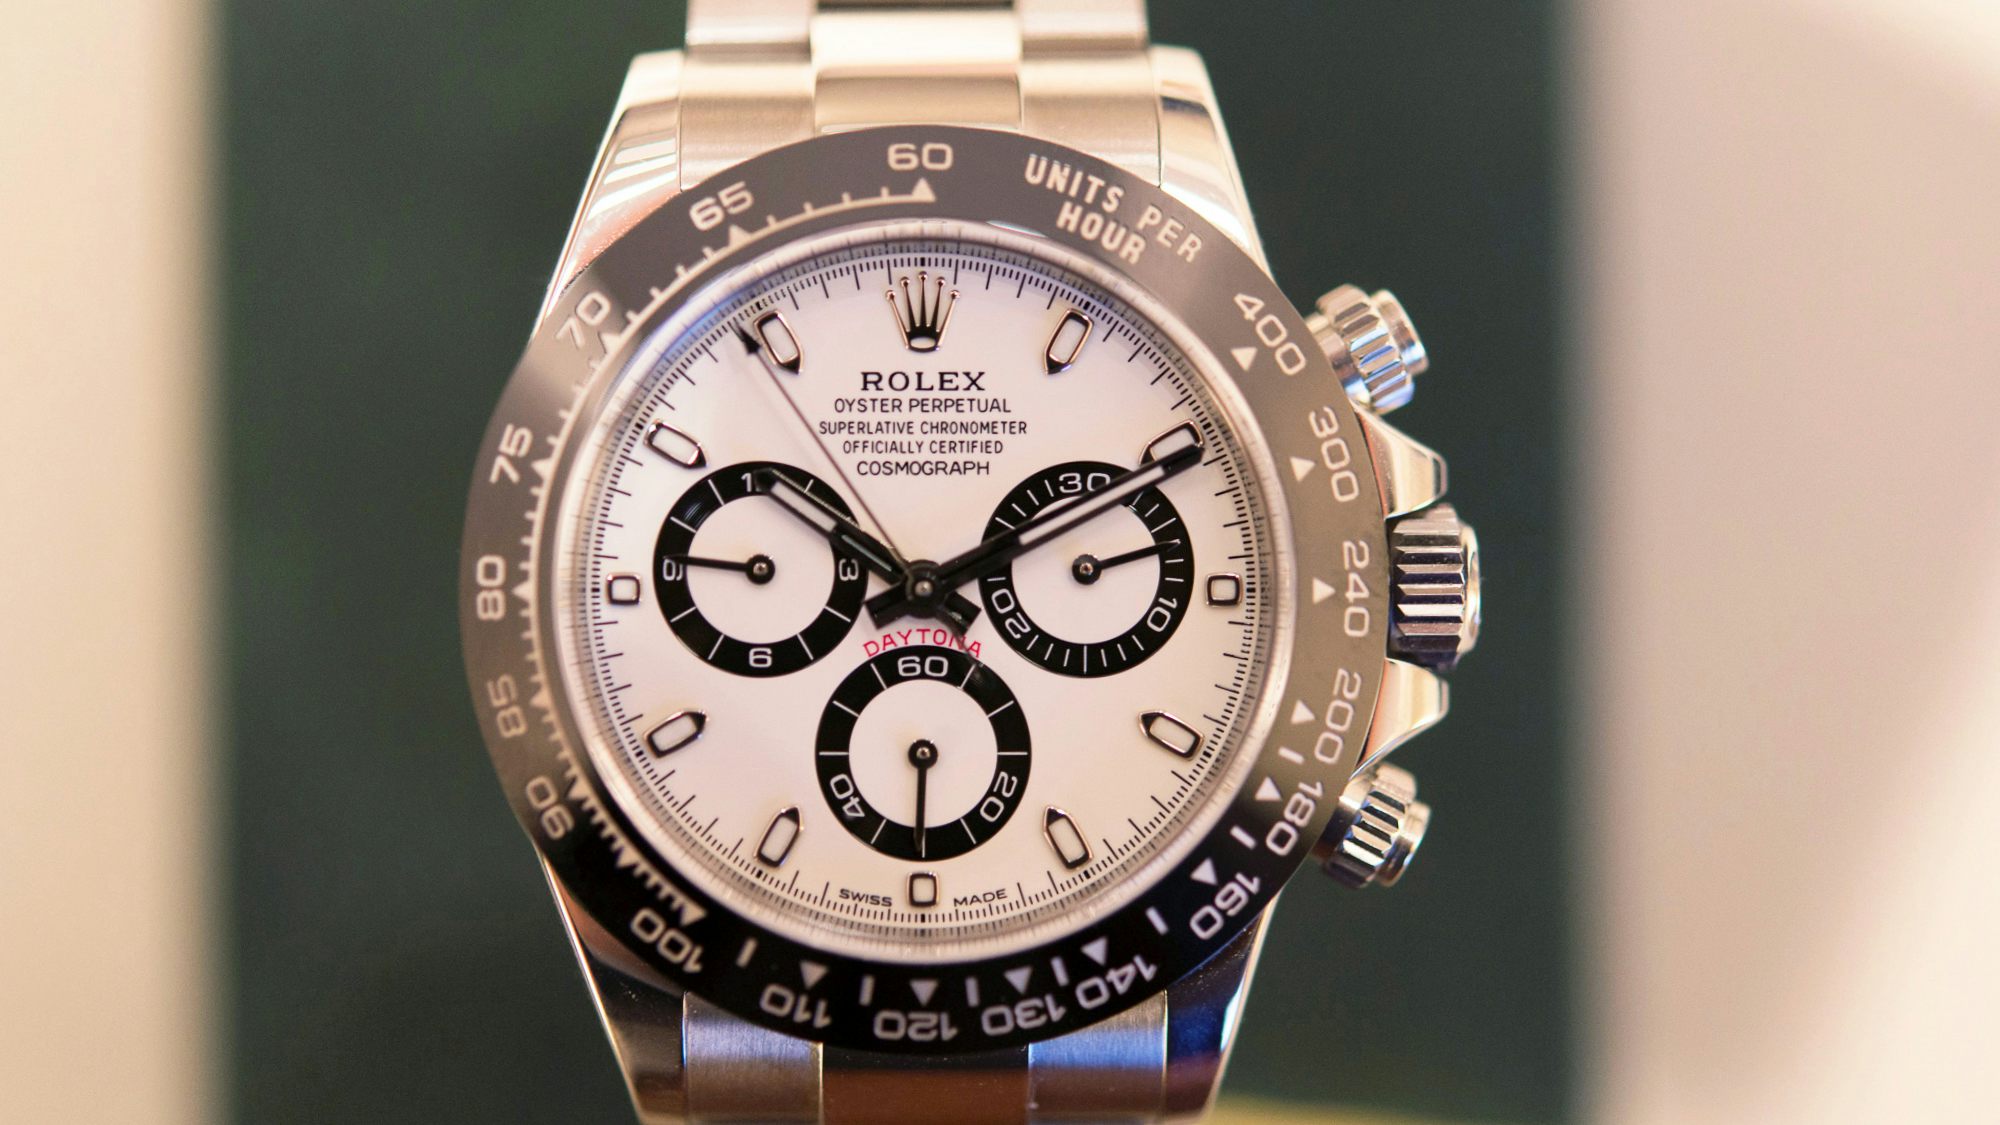 Big Hodinkee To Why Editor: One Of Considered \'The Isn\'t Letters Three\'? - The Rolex